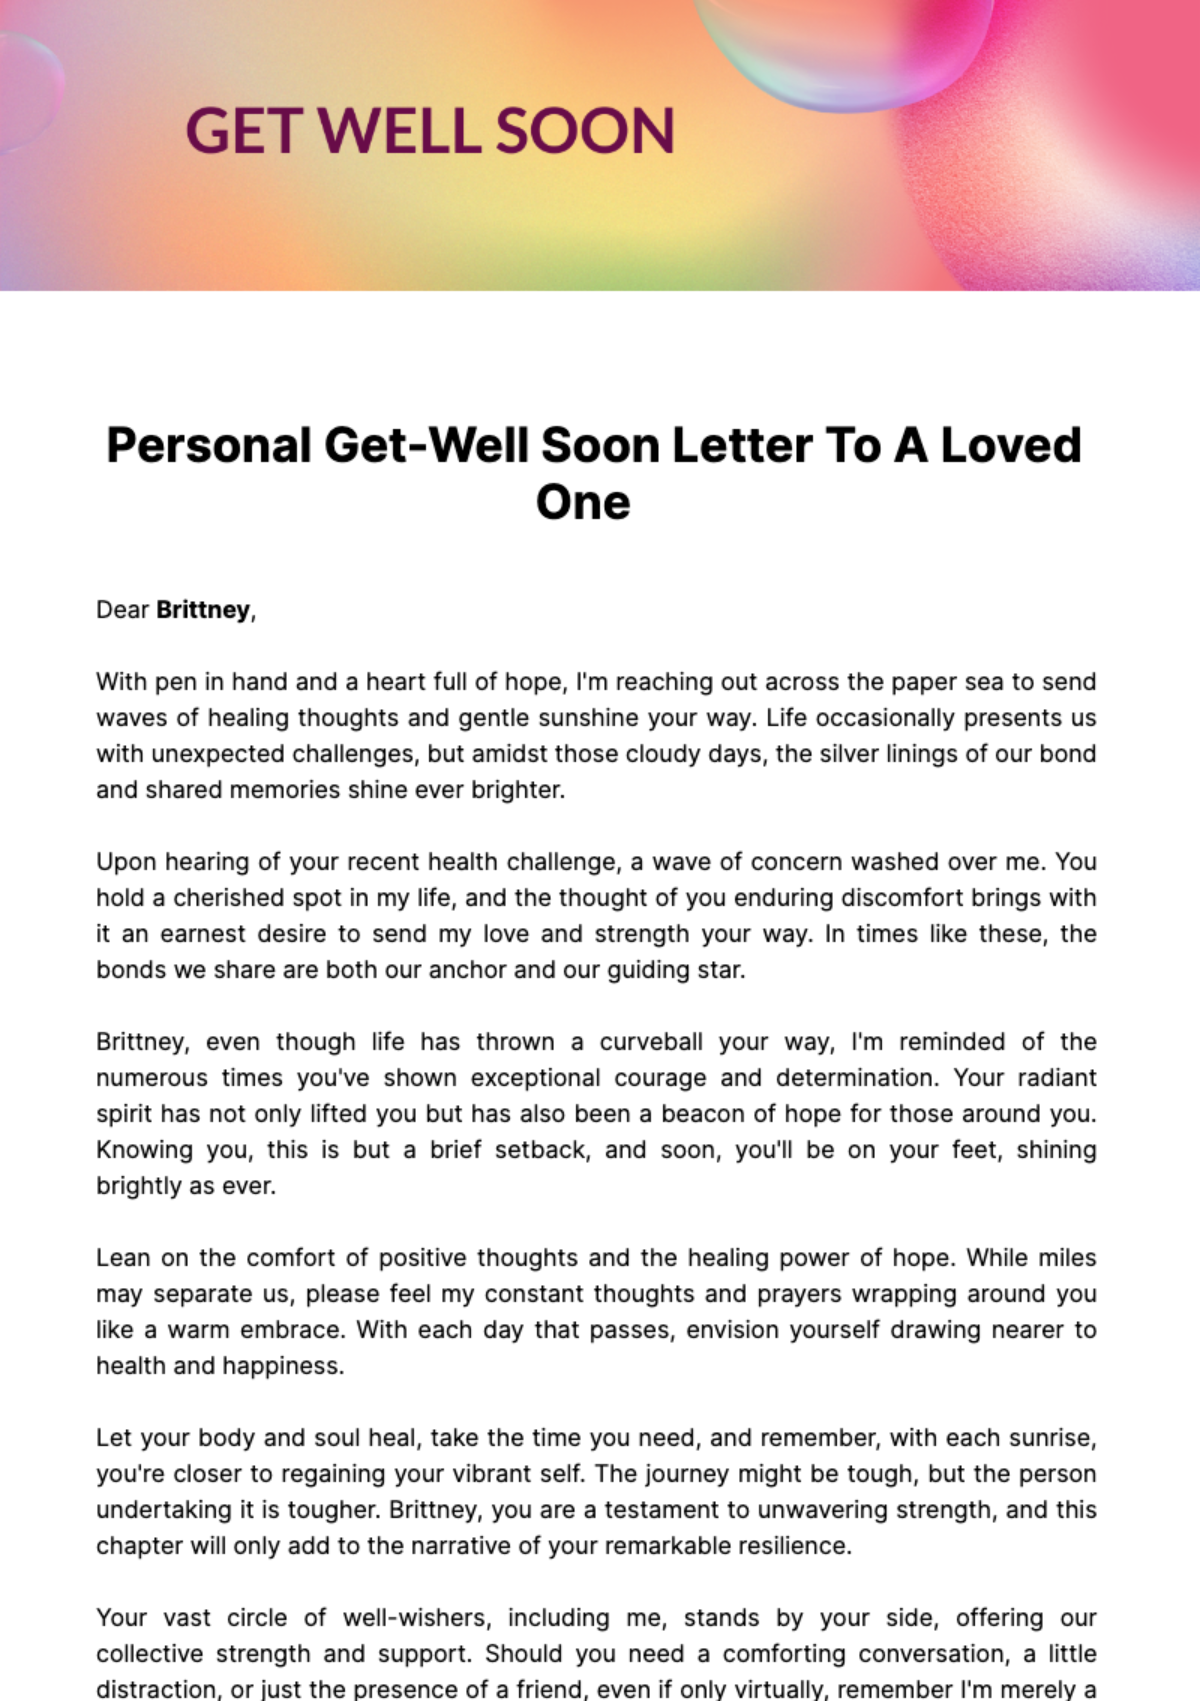 Free Personal Get-Well Soon Letter To A Loved One  Template 